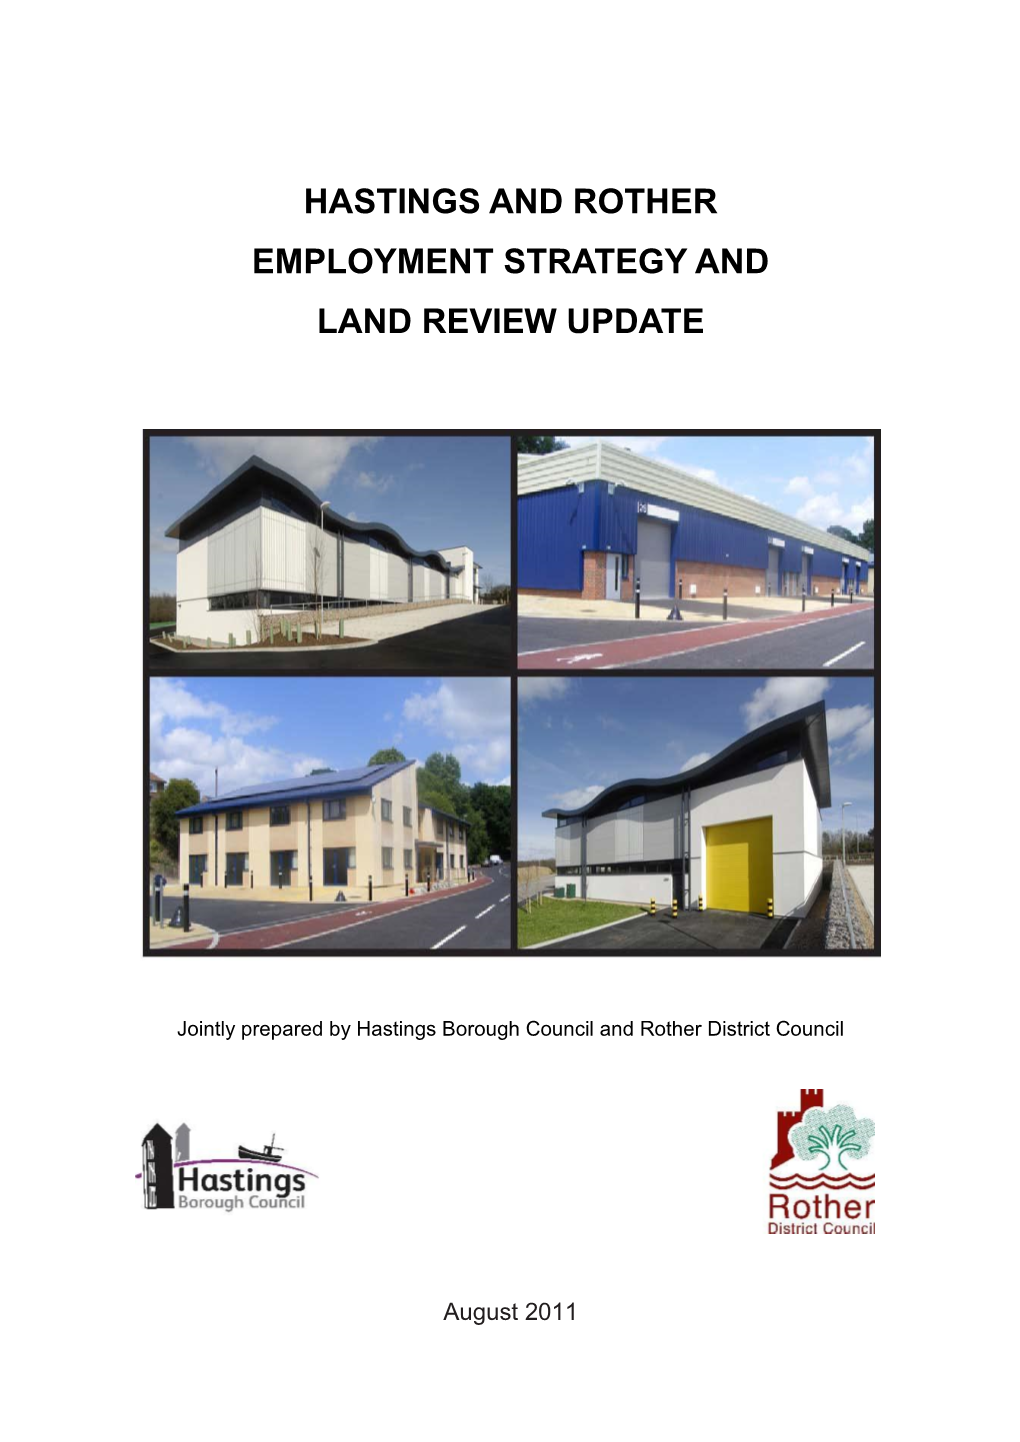 Hastings and Rother Employment Strategy and Land Review Update